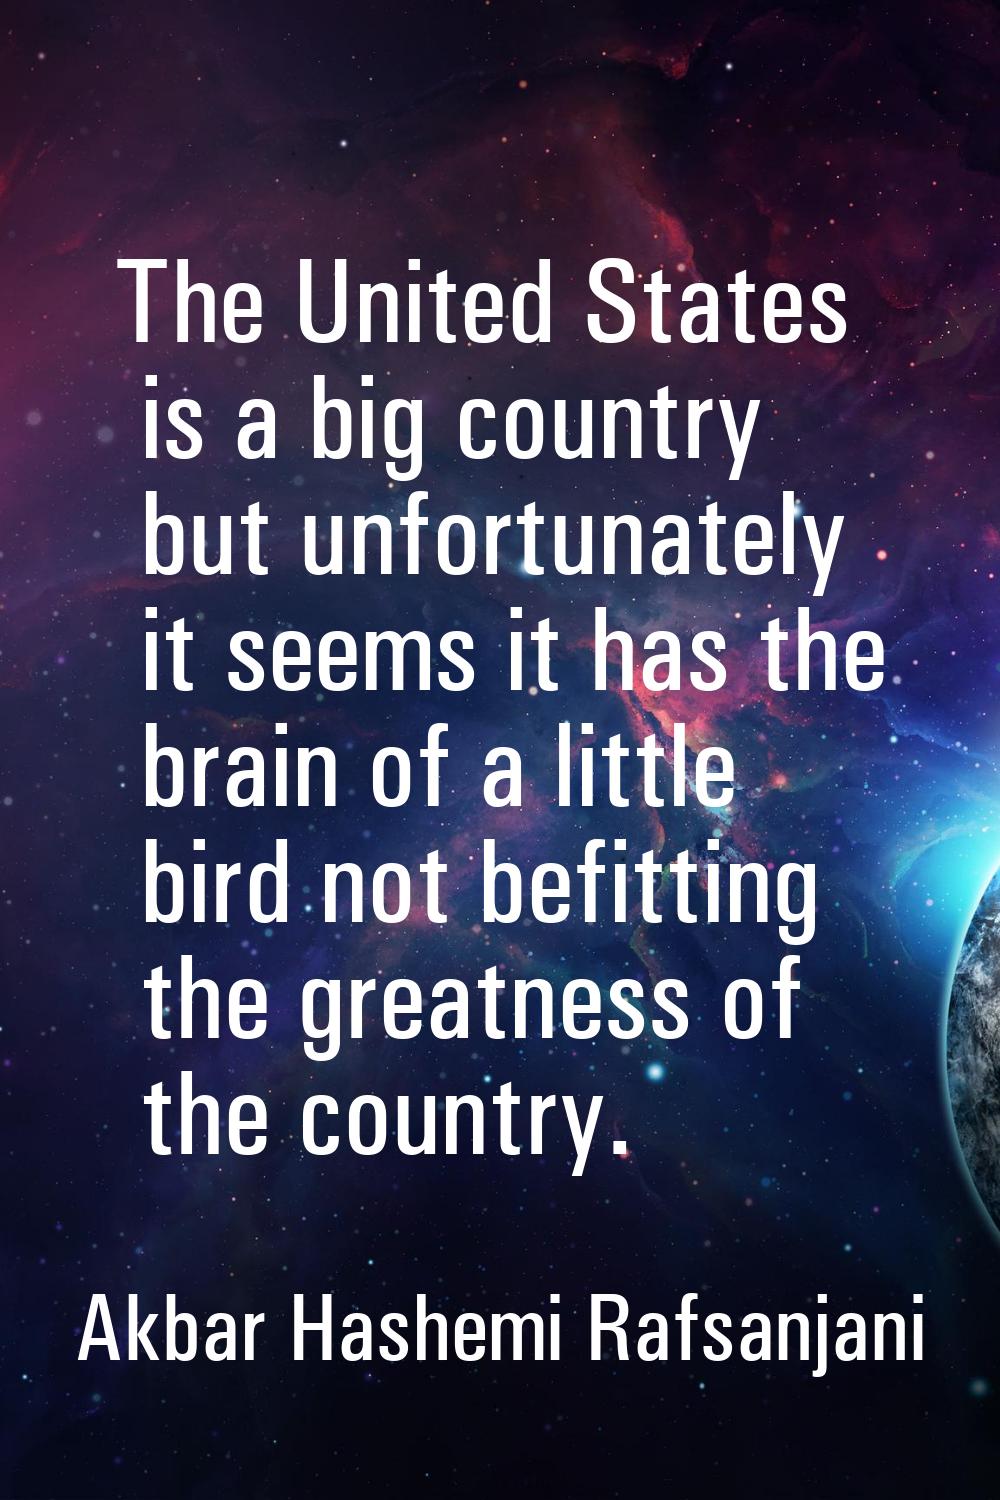 The United States is a big country but unfortunately it seems it has the brain of a little bird not